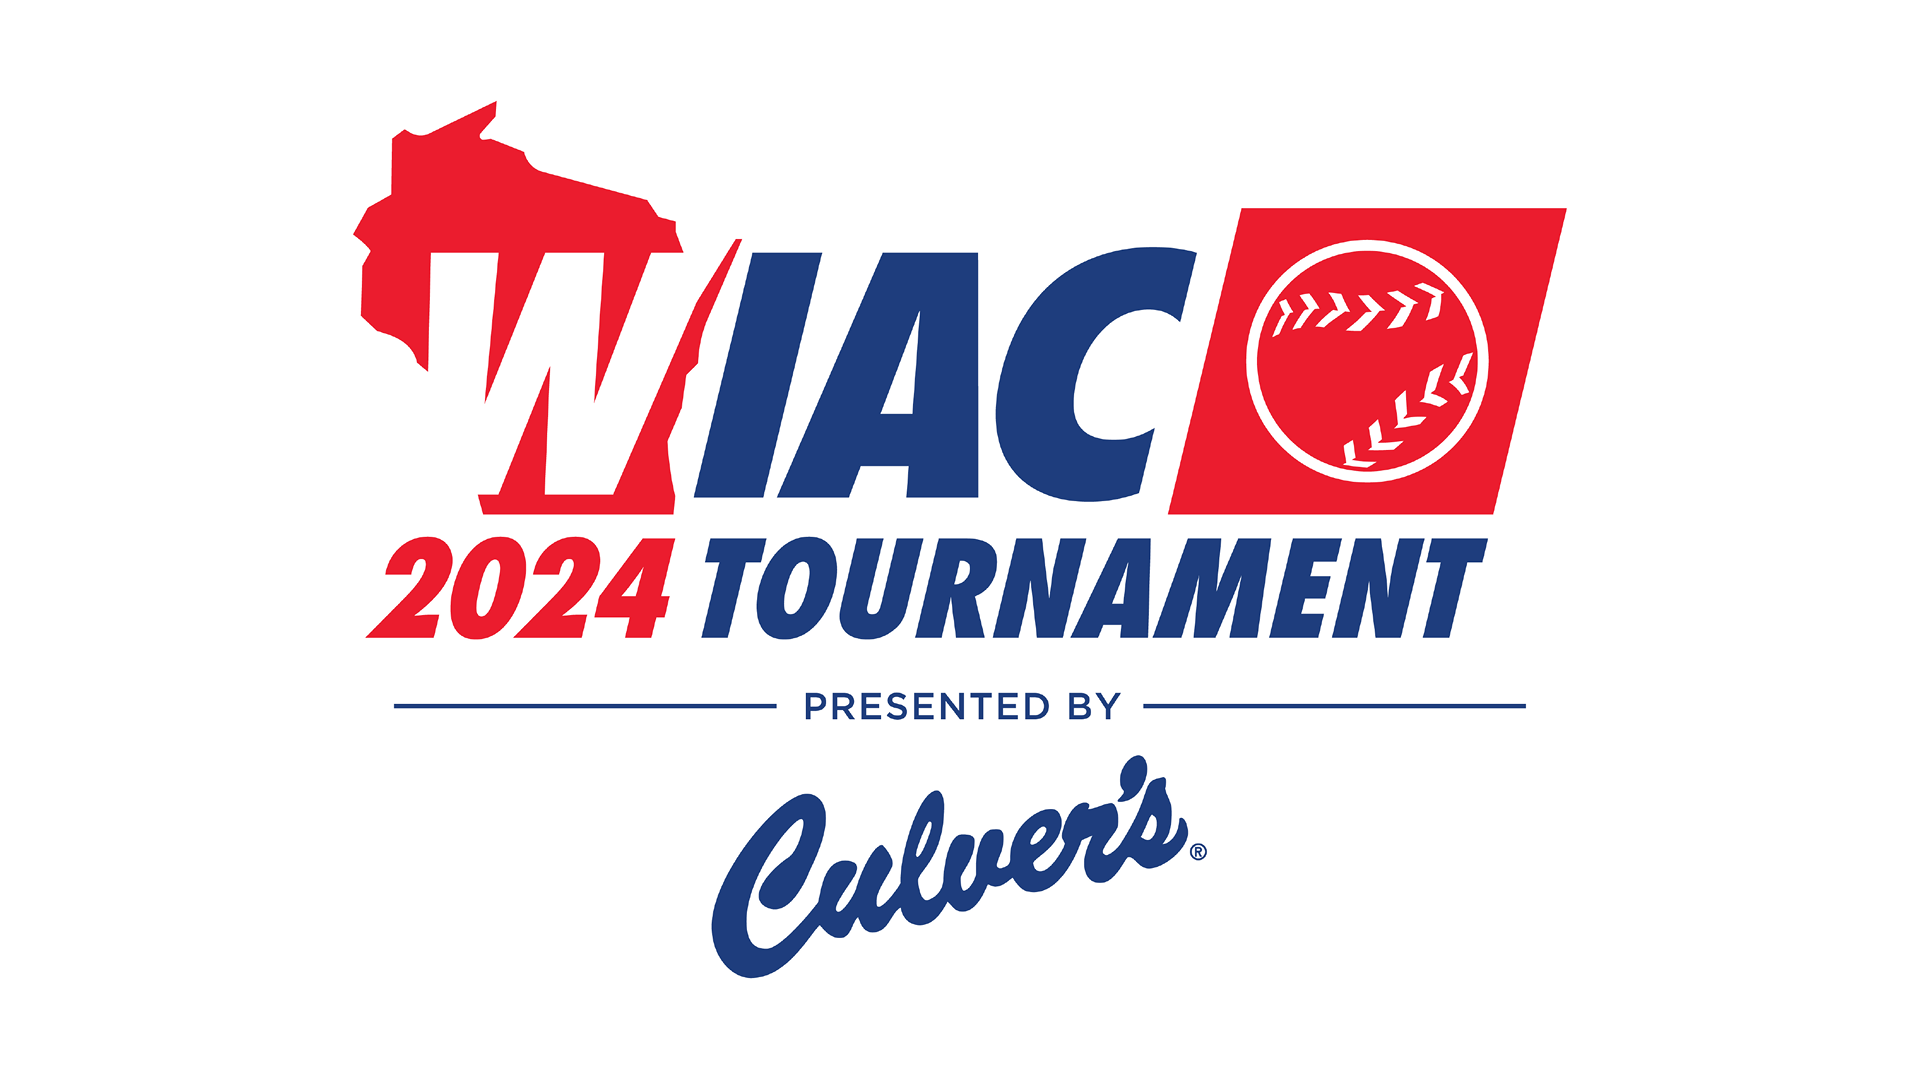 Tickets Available Online For WIAC Championship, Cash Only At Gate